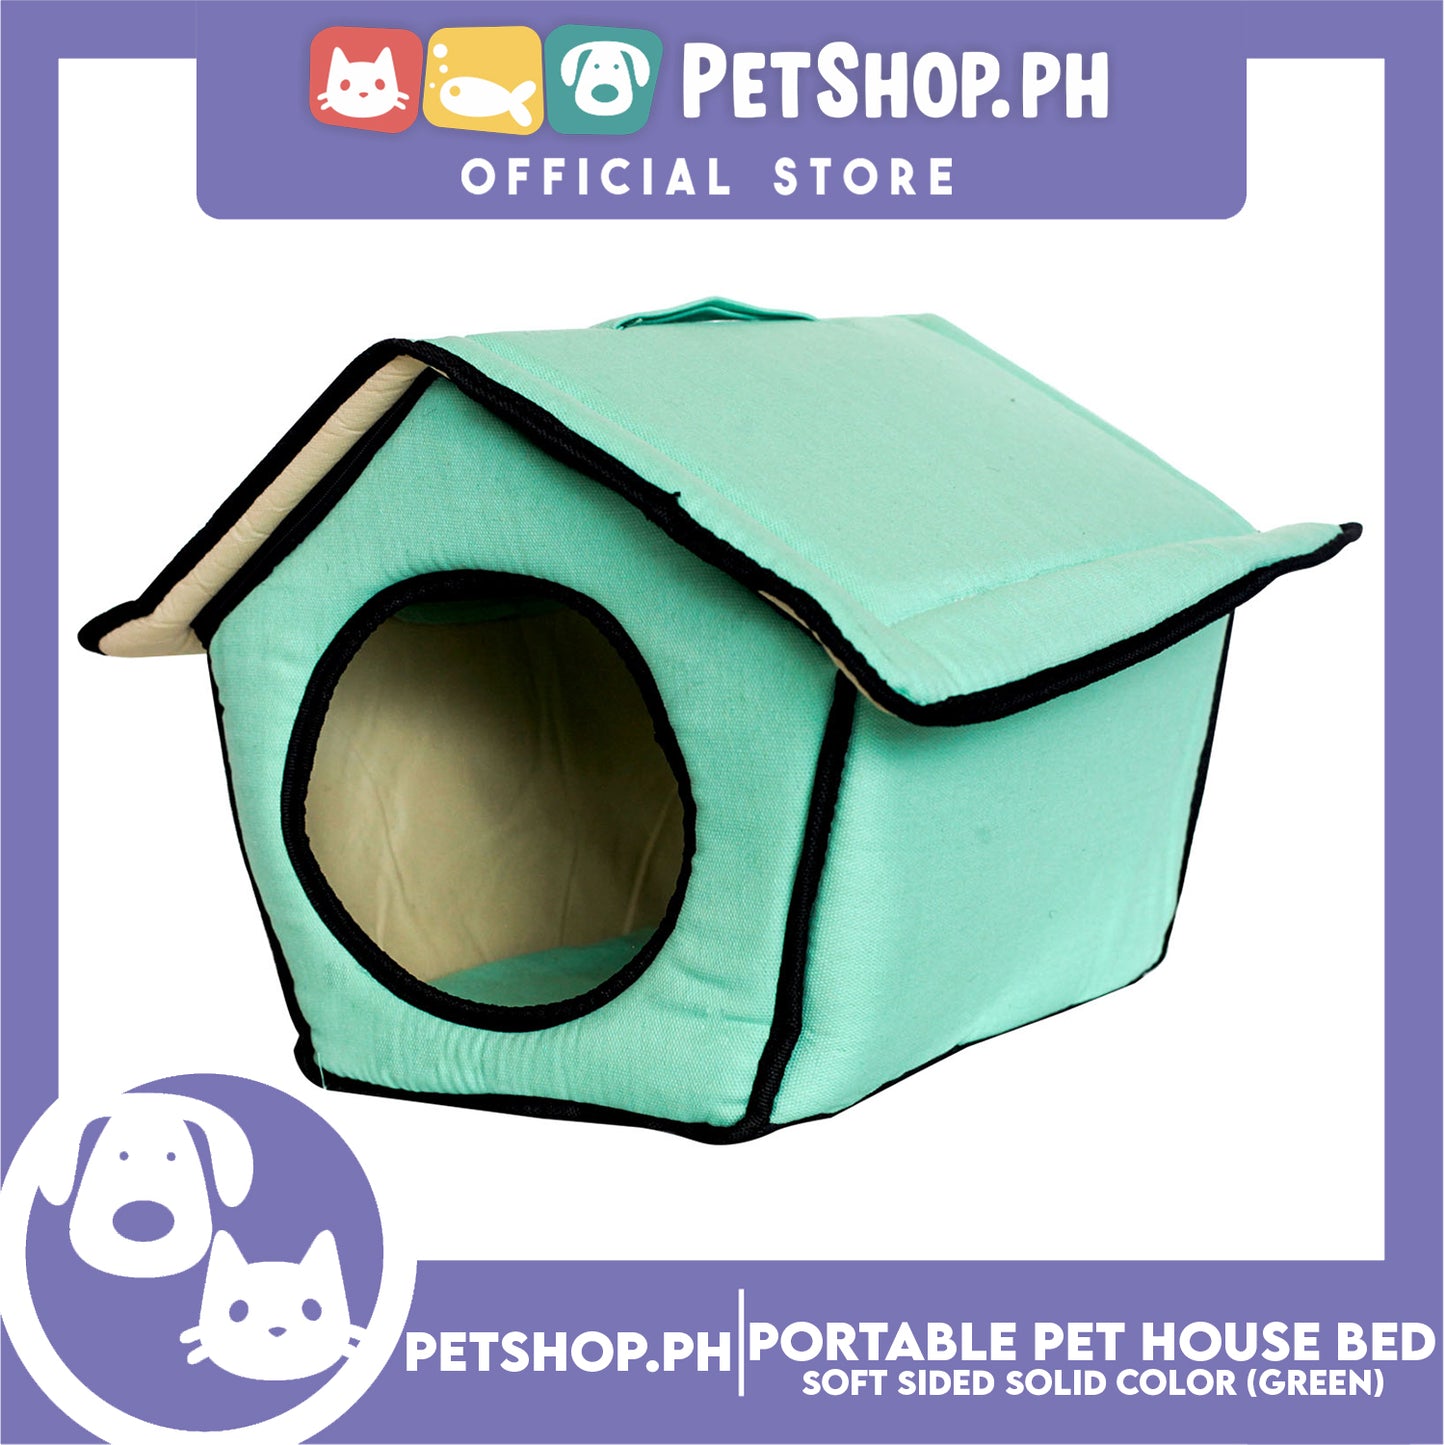 Portable Pet House Bed With Soft Sided Solid Color 35x39x43cm Large (Mint Green)